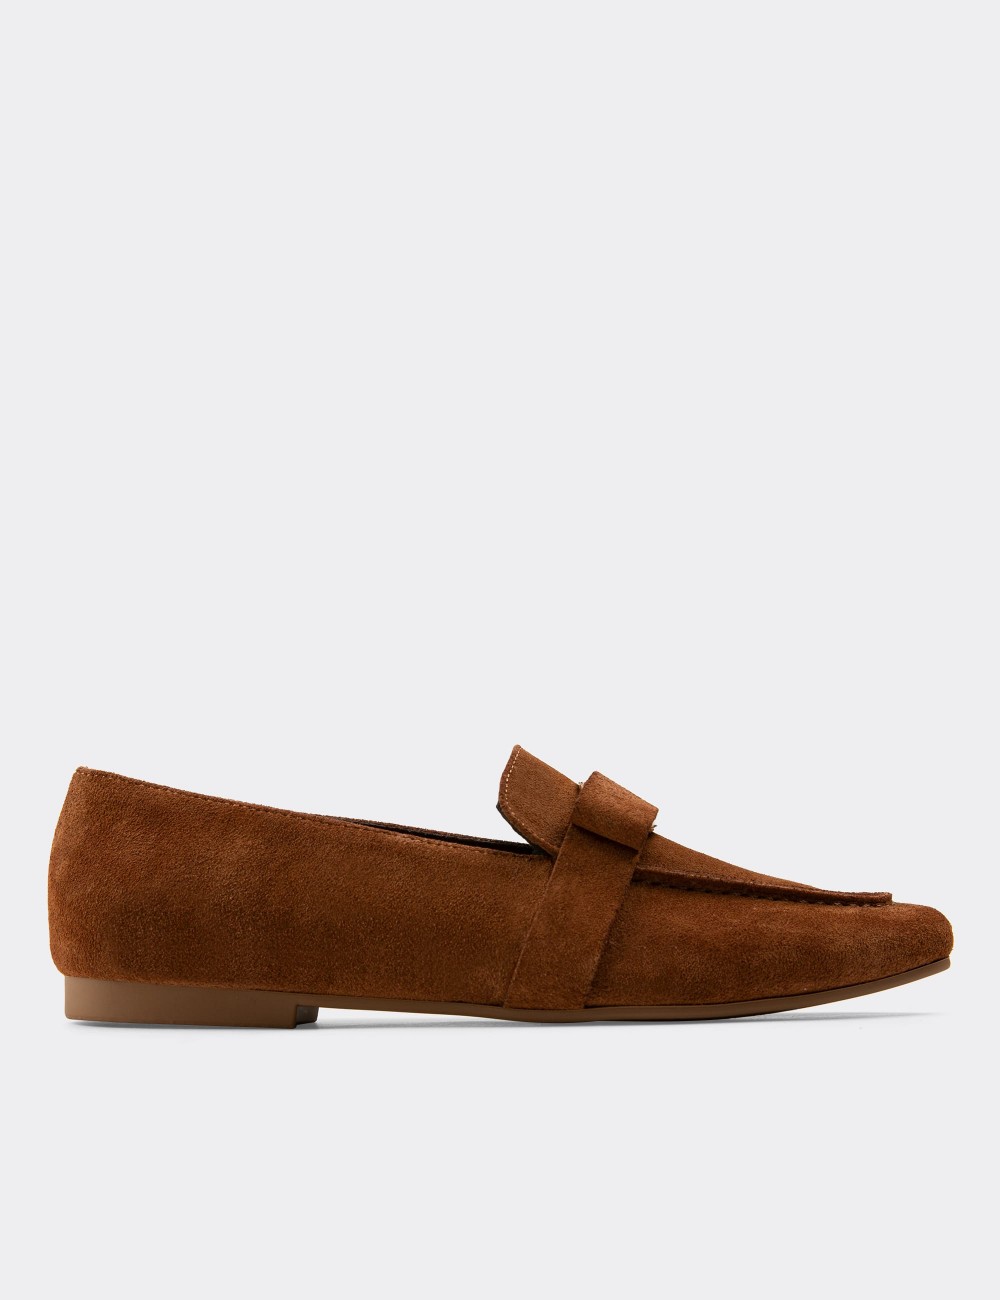 Tan Suede Leather Loafers - 01913ZTBAC01